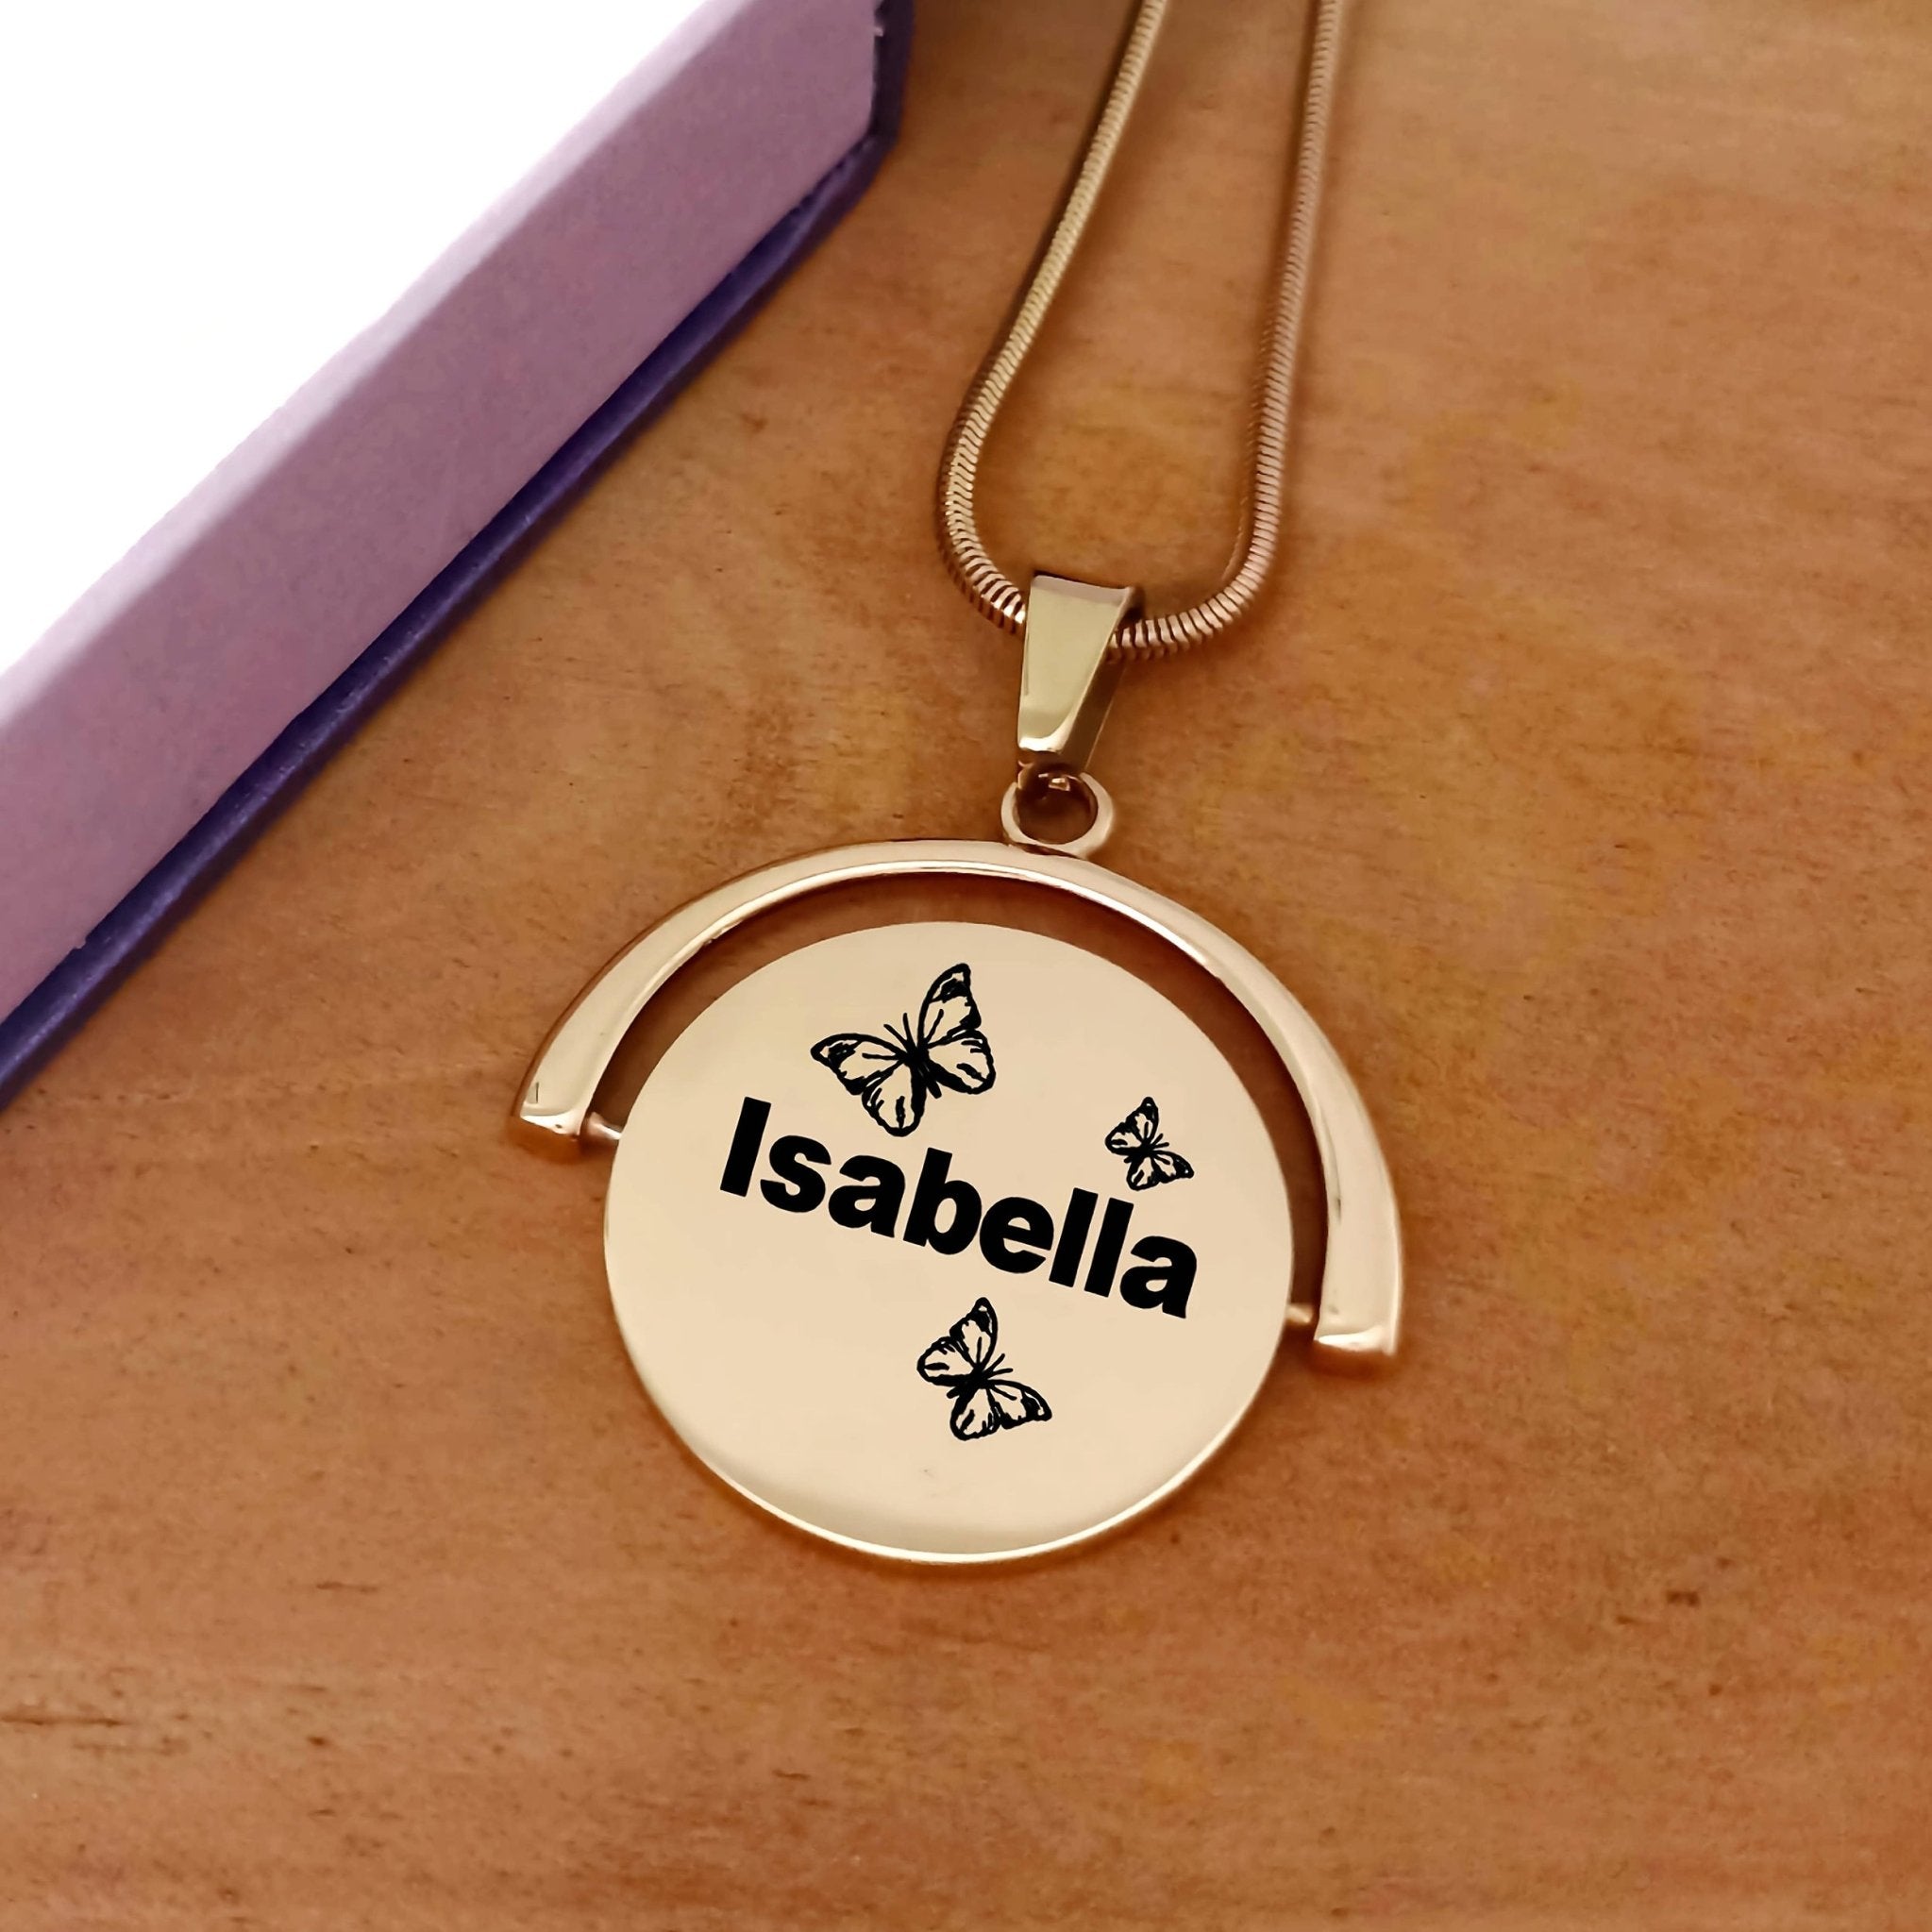 My Secret Spinning Name Necklace - Name Necklaces by Belle Fever